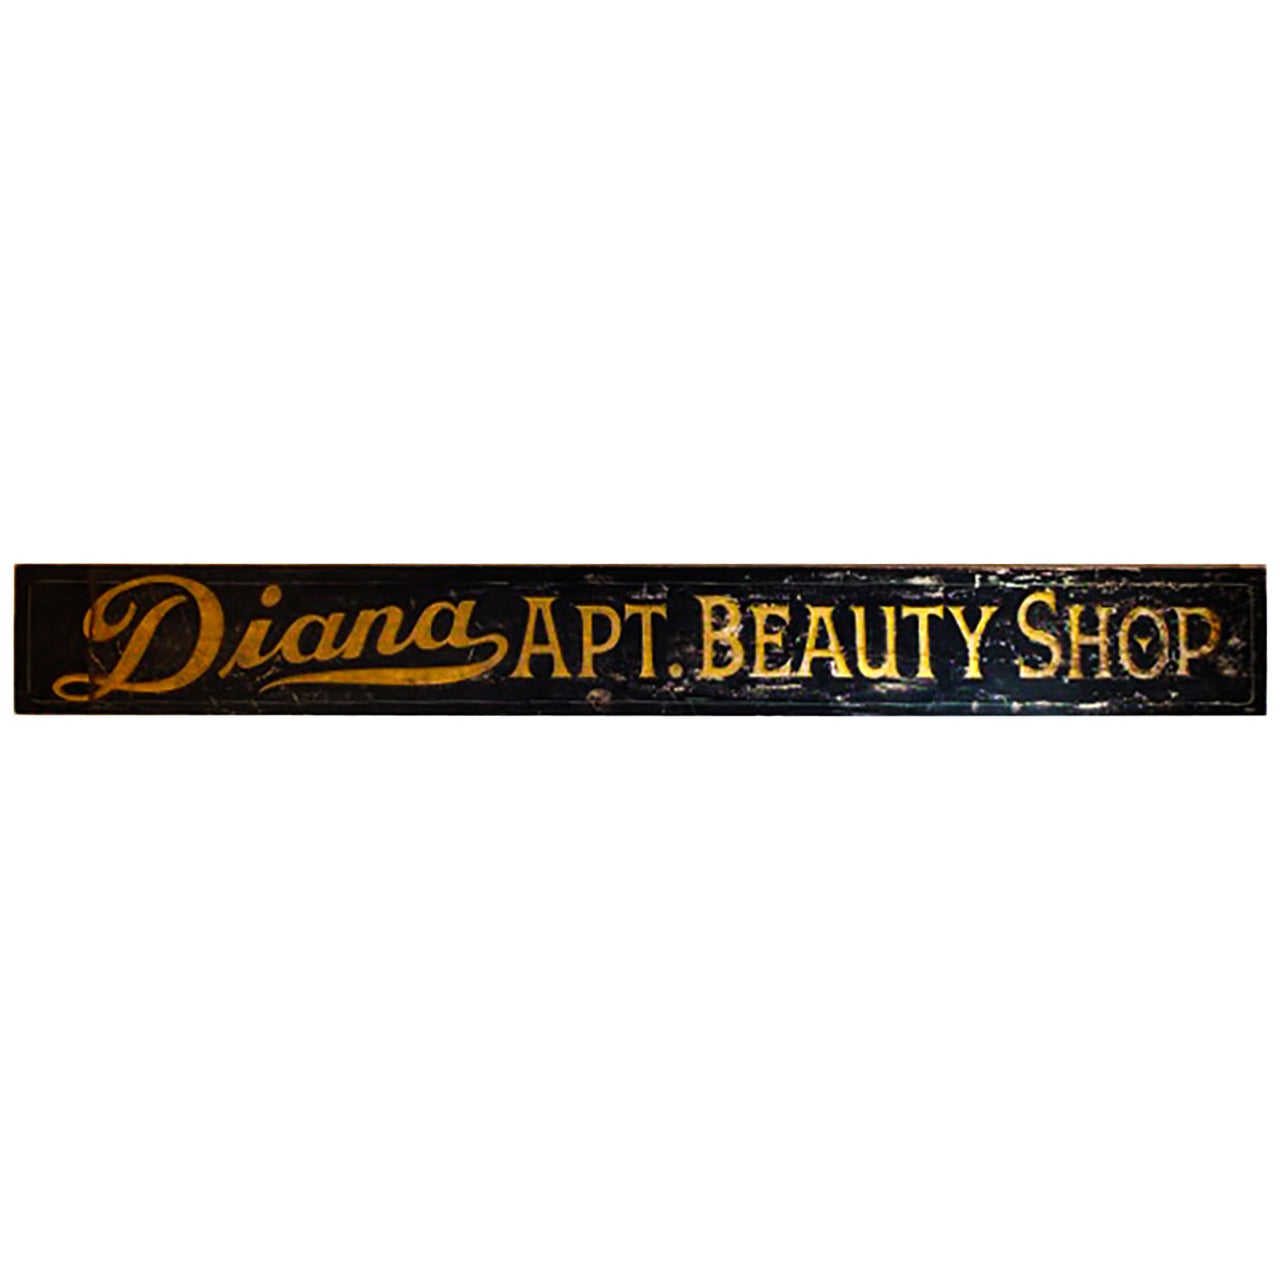 Early 20th c. Hand-Painted Wooden Beauty Shop Sign